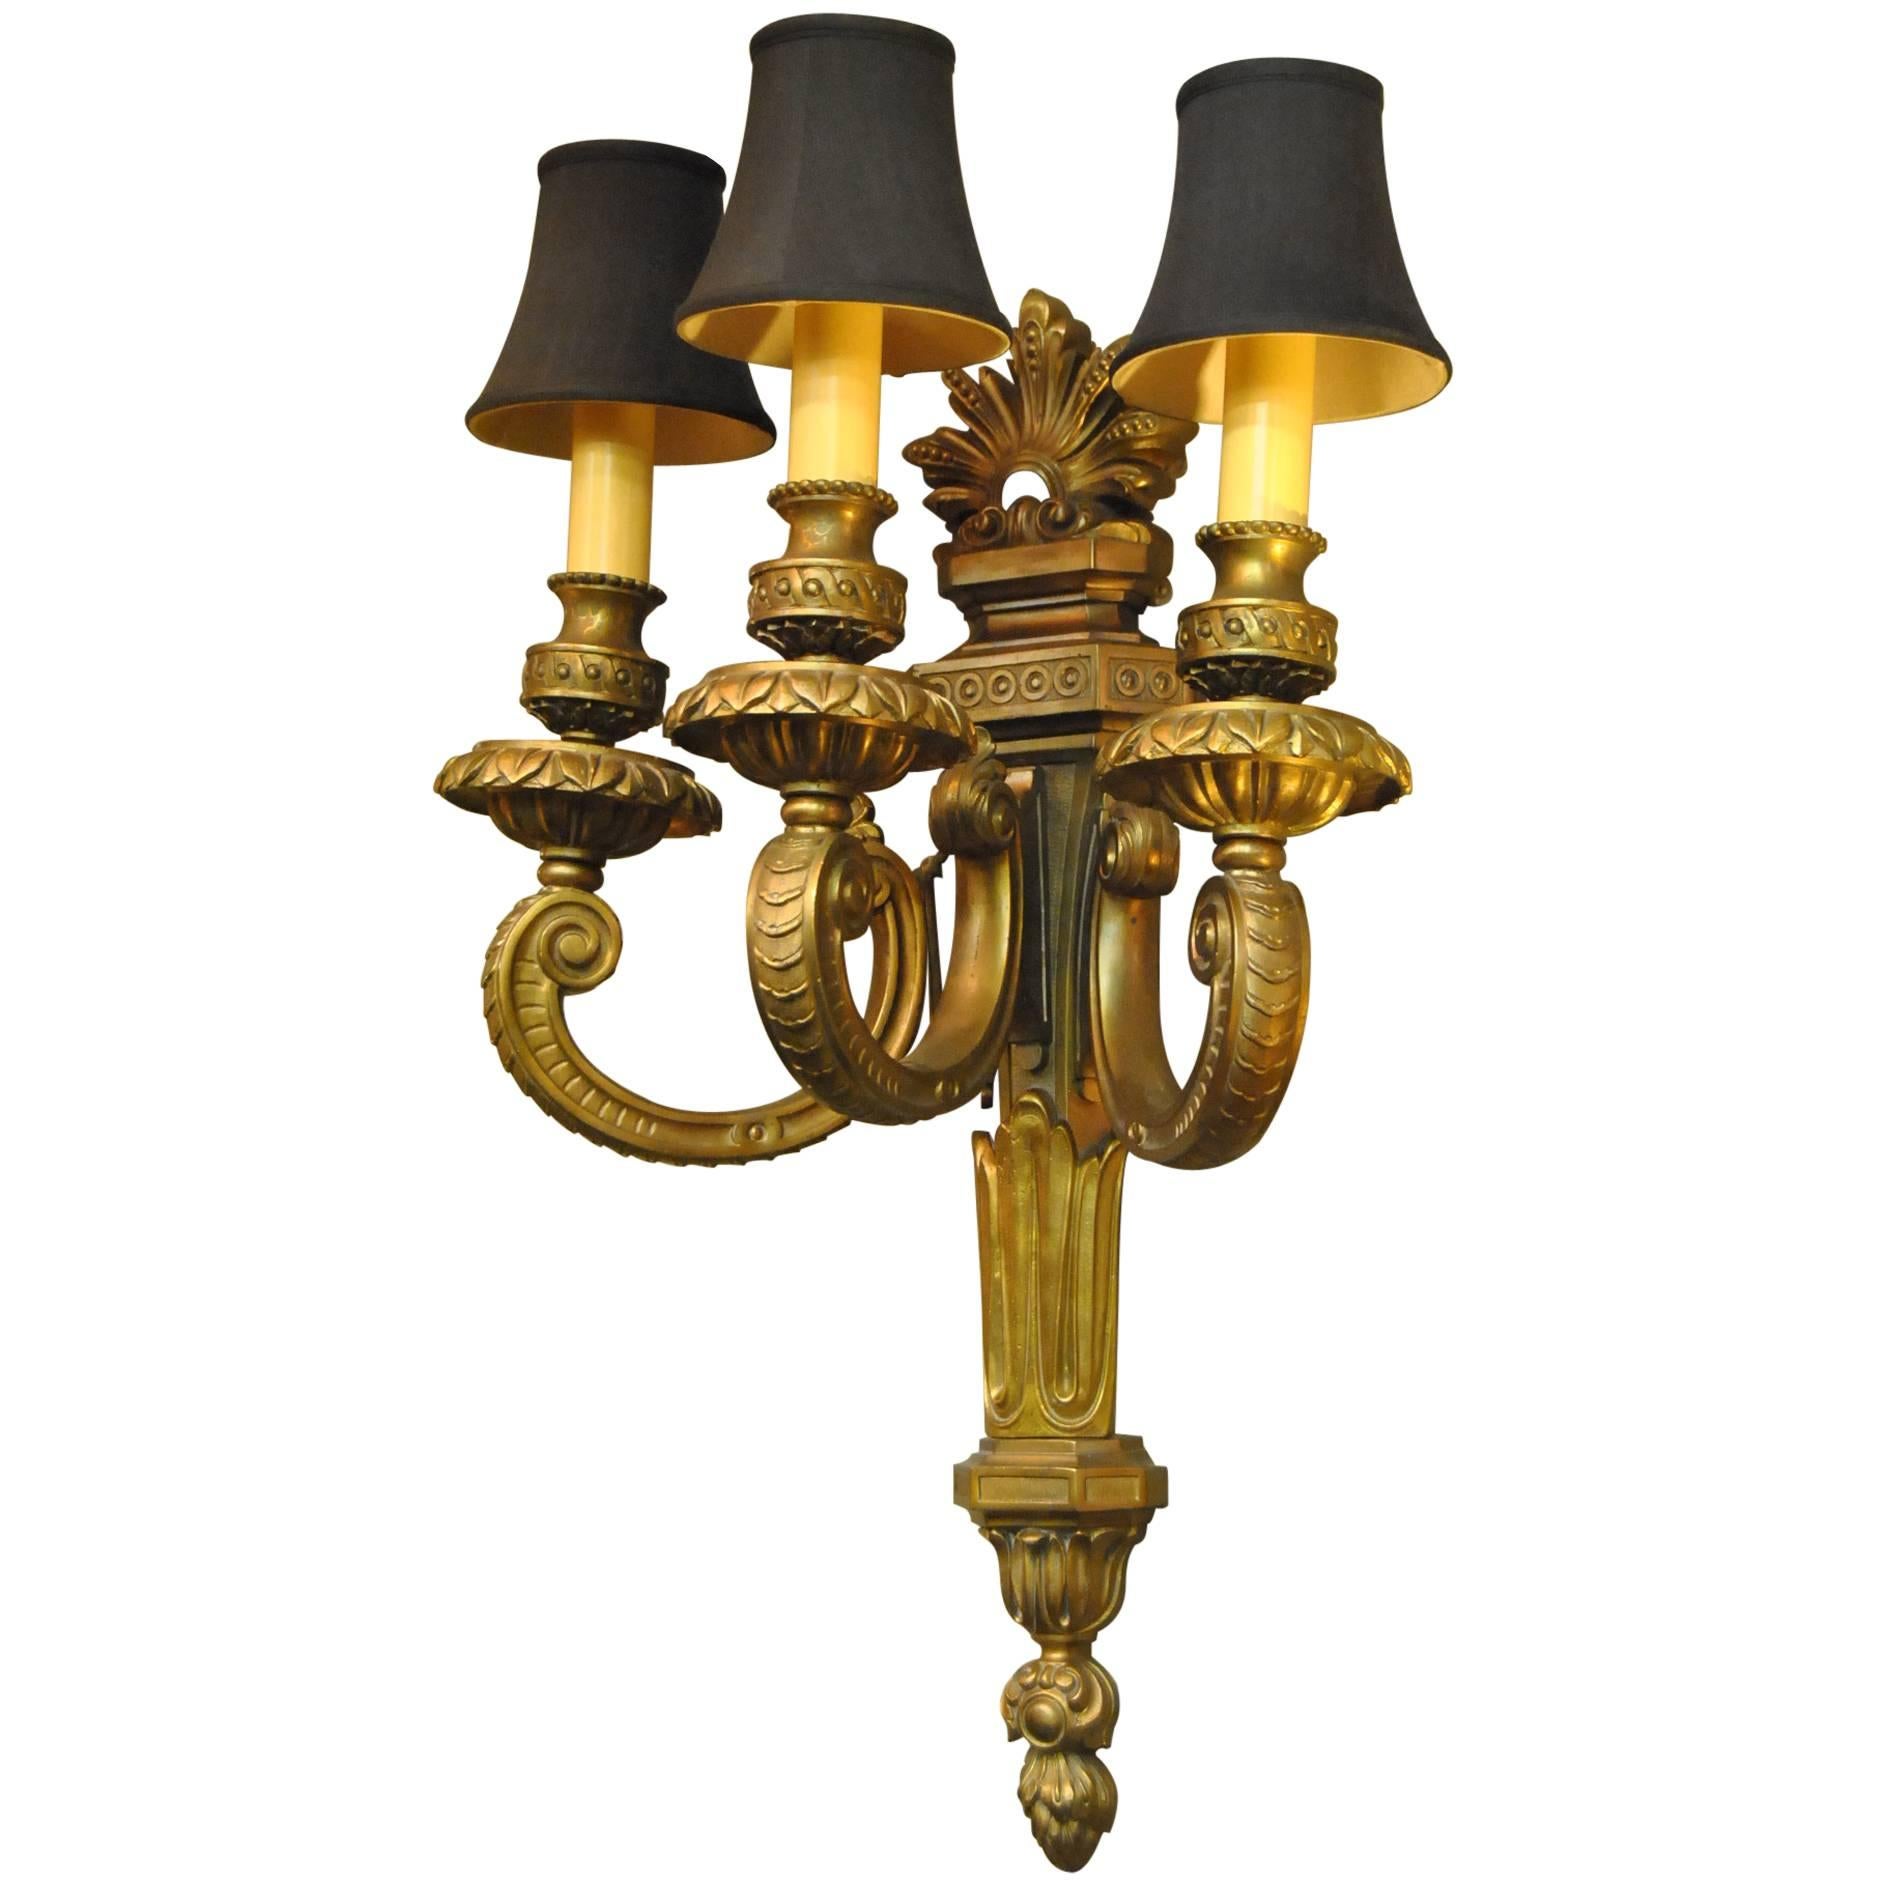 Ornate Doré Bronze Neoclassical Three-Arm Wall Sconce